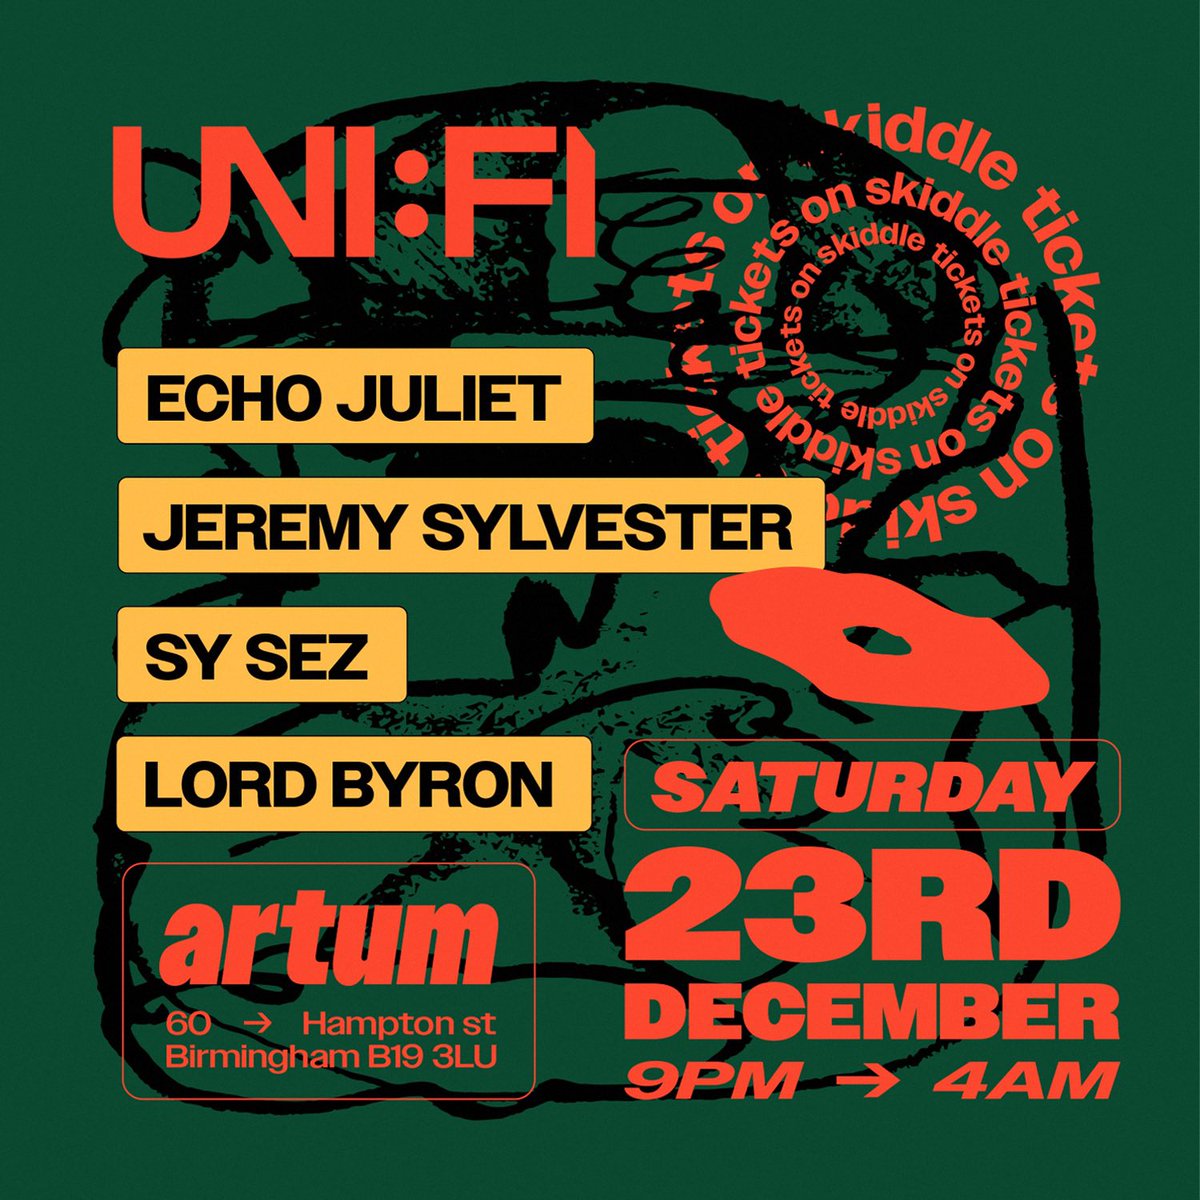 Back up the M40 this weekend to Birmingham for our UNIFI party inside @CafeArtum alongside @jeremysylvester @echojulietdj & Lord Byron🔥 Hope to see you there 😘 Tickets: skiddle.com/whats-on/Birmi…